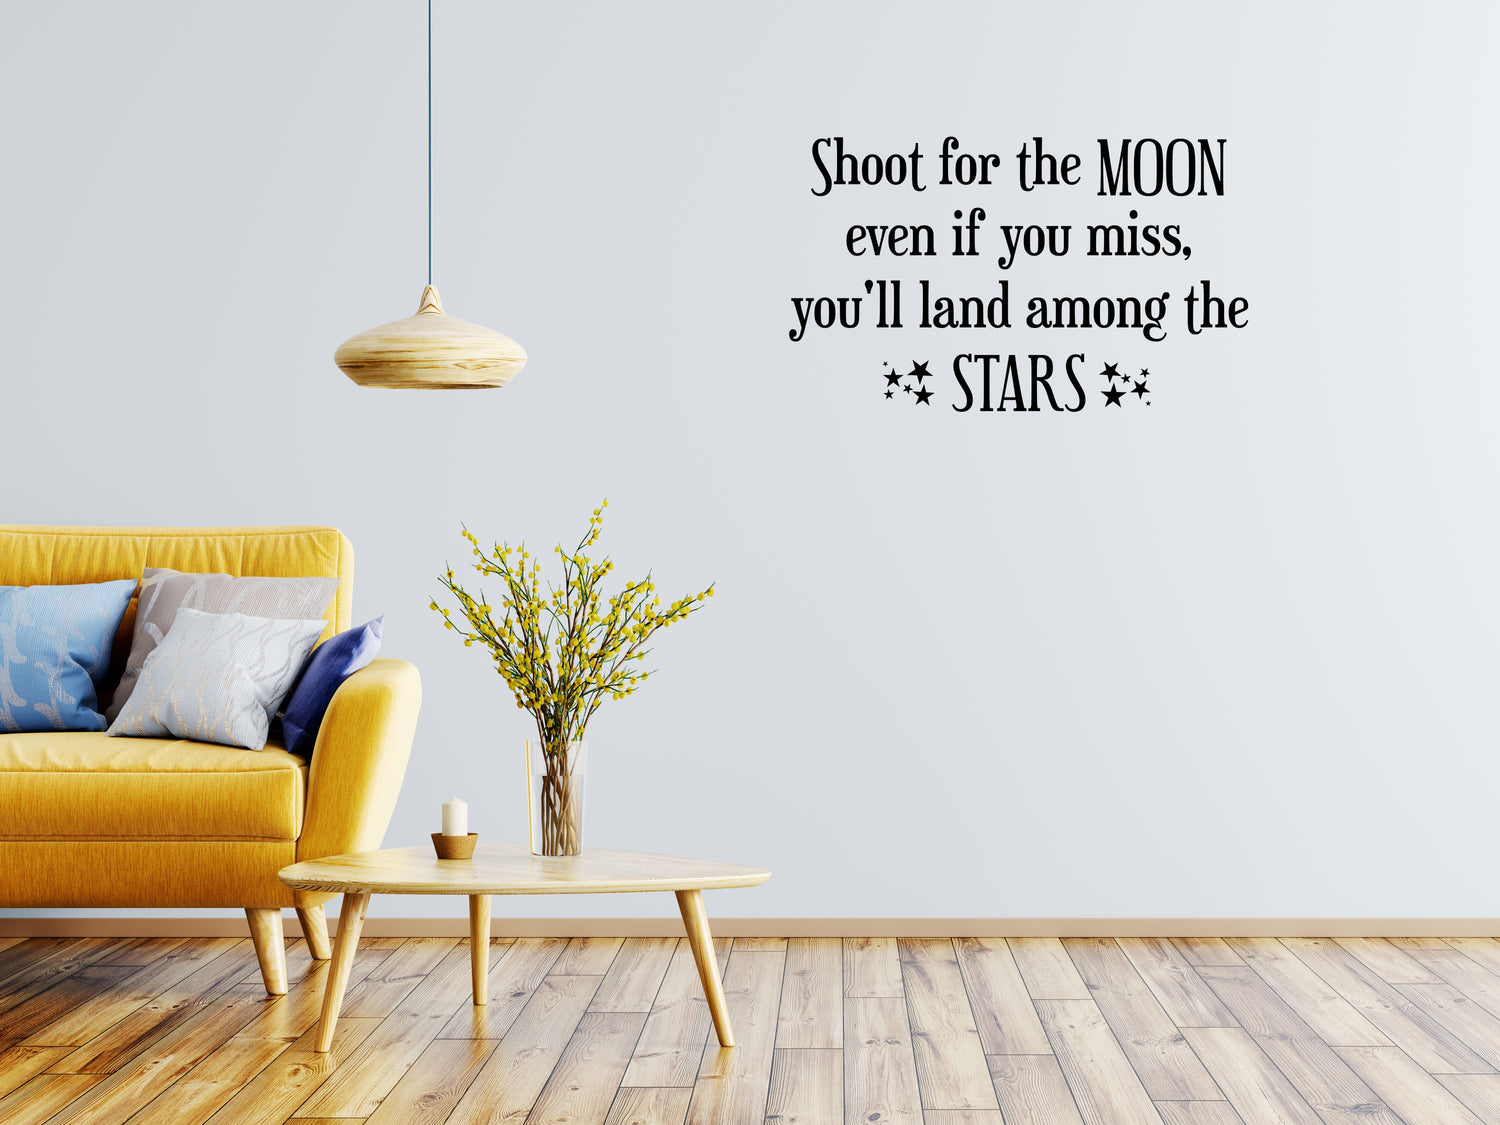 Shoot For The Moon and Stars - Inspirational Wall Decals Vinyl Wall Decal Inspirational Wall Signs 